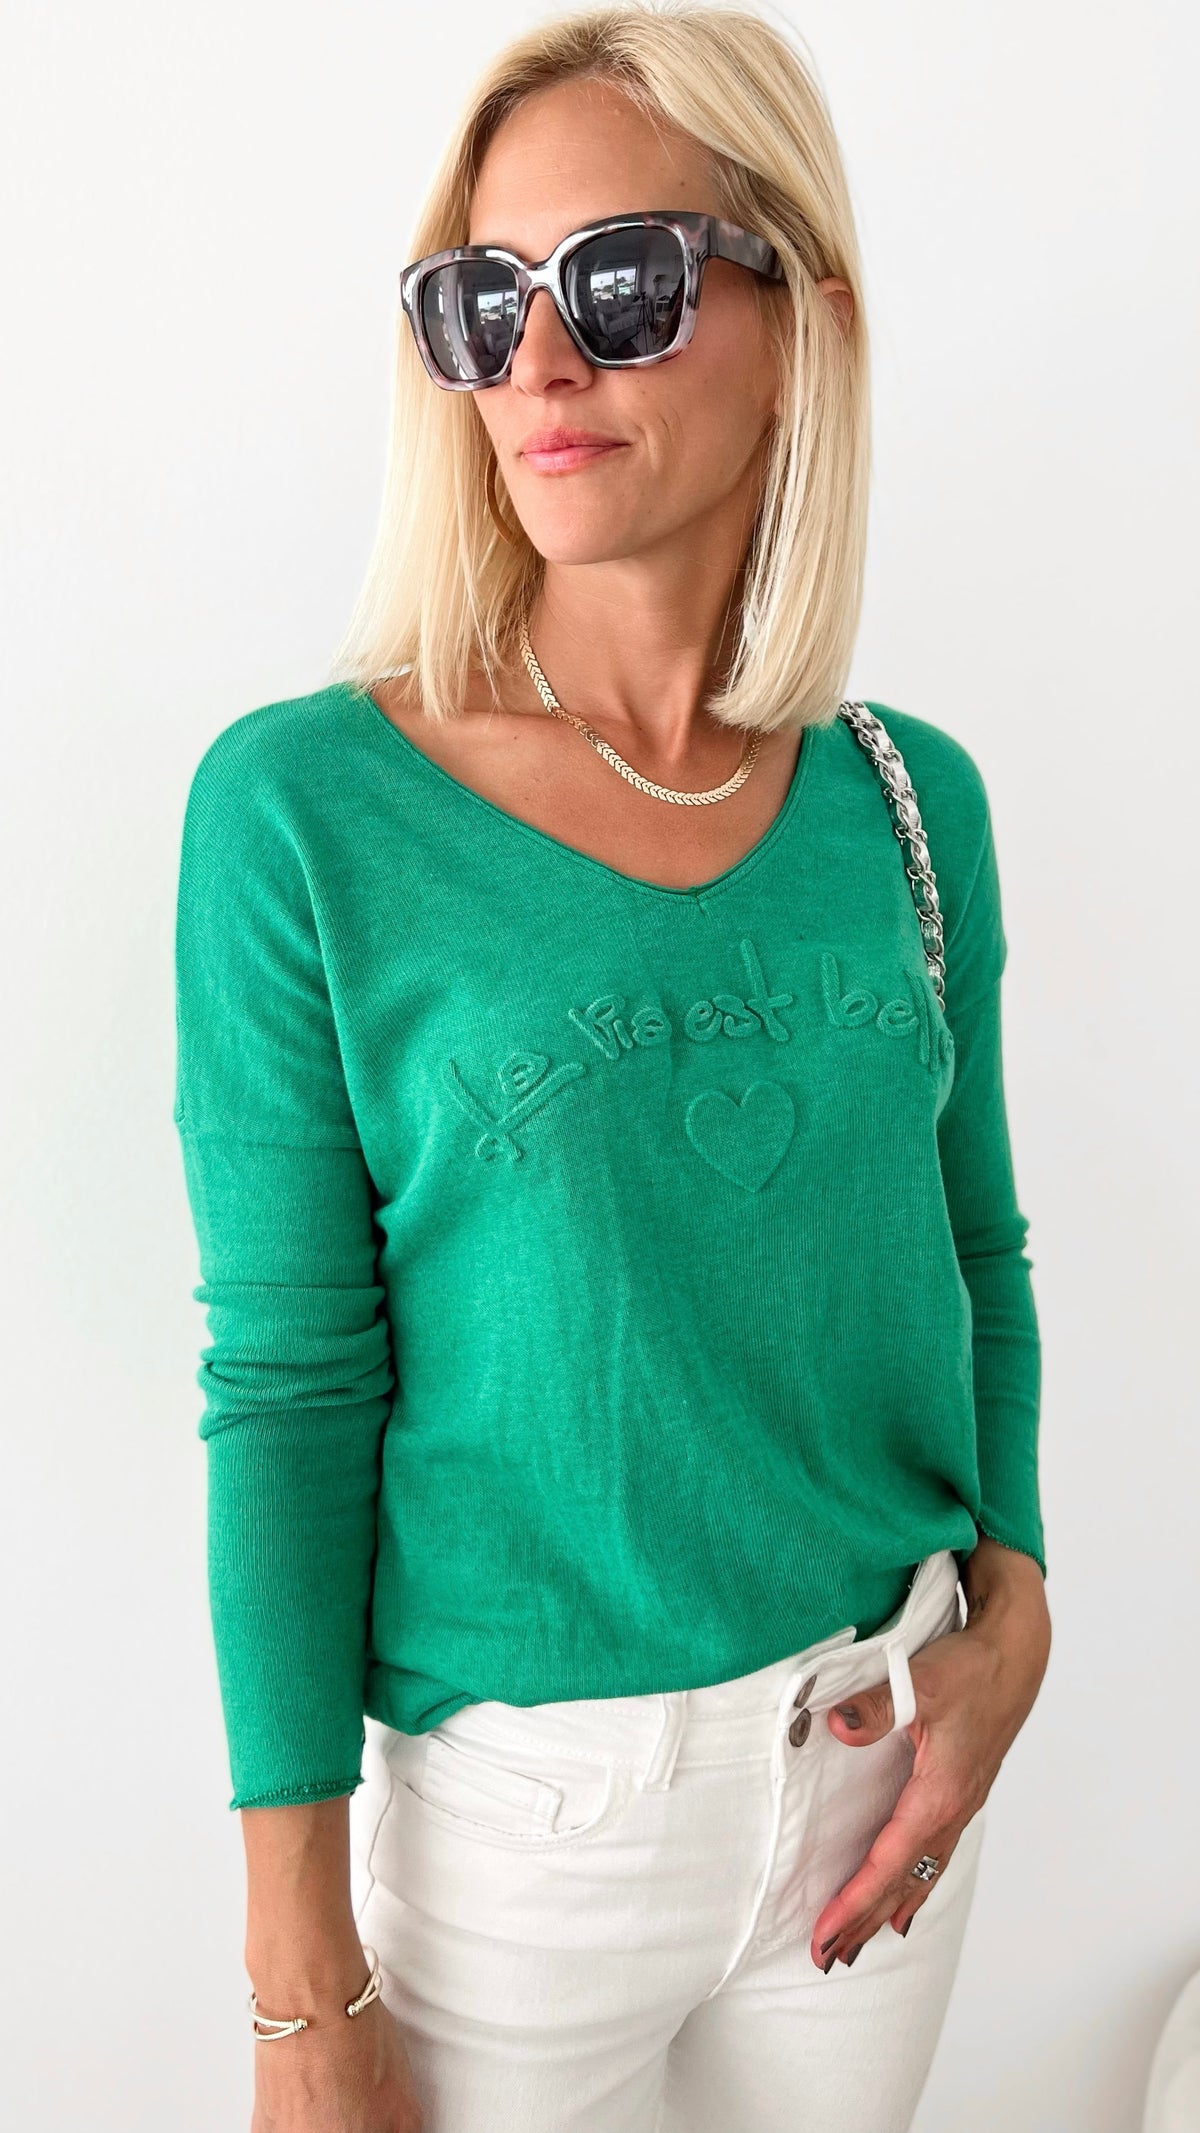 "La Vie Est Belle" Lightweight Knit Top - Kelly Green-130 Long sleeve top-VENTI6 OUTLET-Coastal Bloom Boutique, find the trendiest versions of the popular styles and looks Located in Indialantic, FL